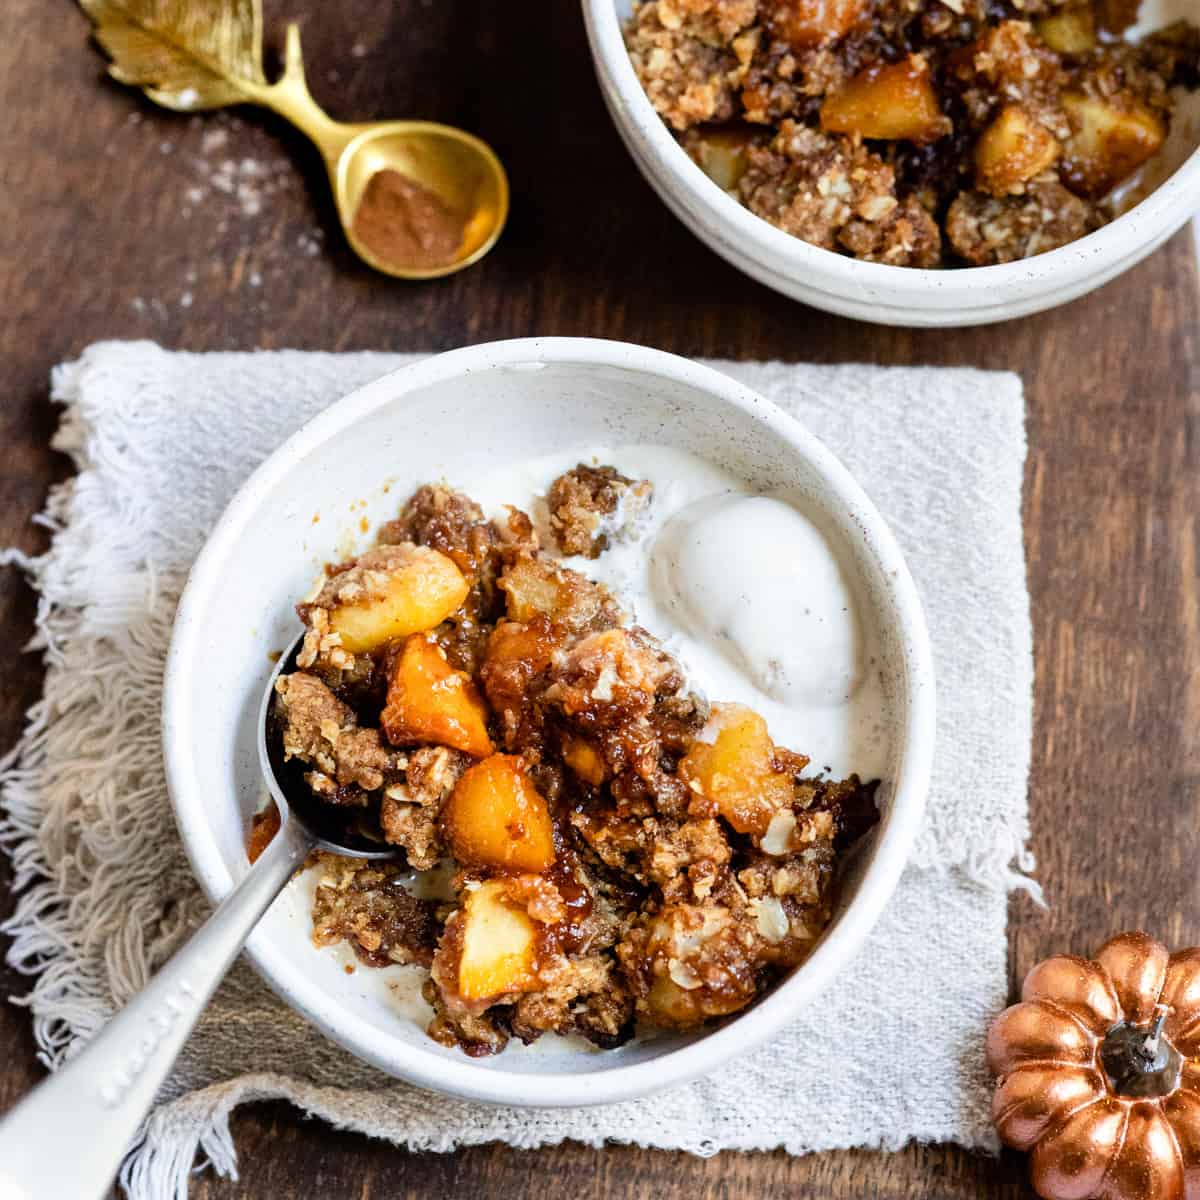 Apple and pear crumble in a white bowl with ice cream